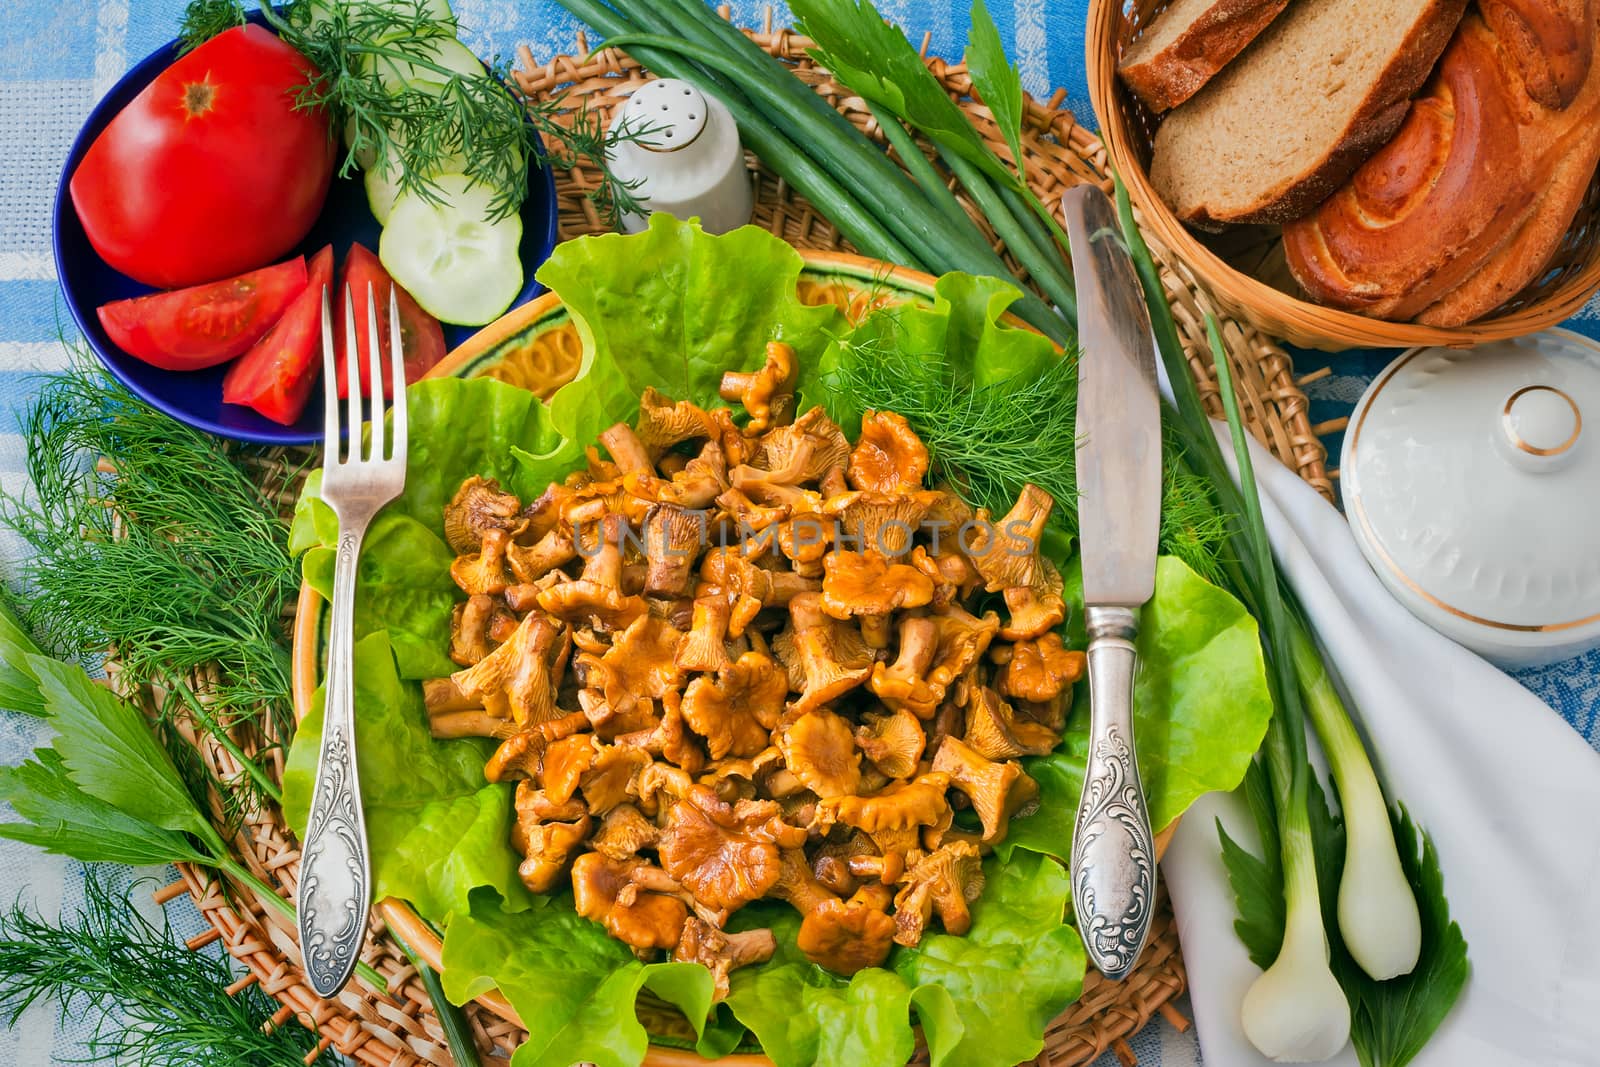 Dish with lettuce leaves on which appetizing fried chanterelles, and also vegetables, bread are located.